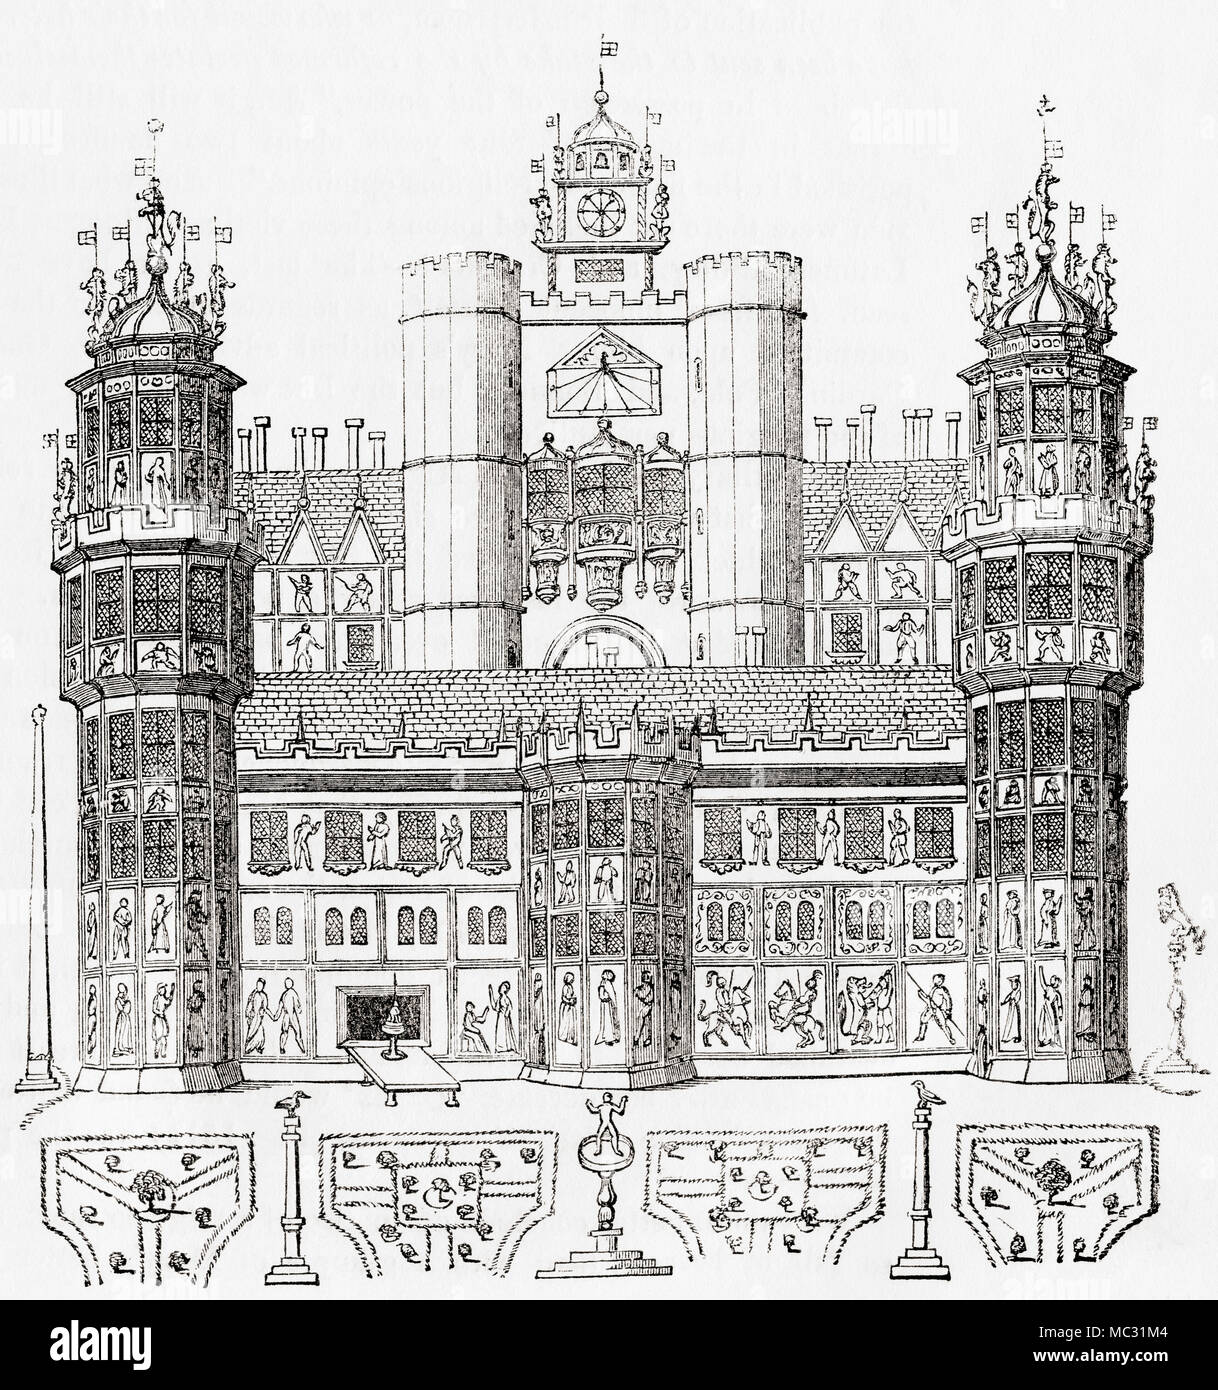 Nonsuch Palace, a Tudor royal palace, built by Henry VIII in Surrey, England which stood from 1538 to 1682–3.  From Old England: A Pictorial Museum, published 1847. Stock Photo